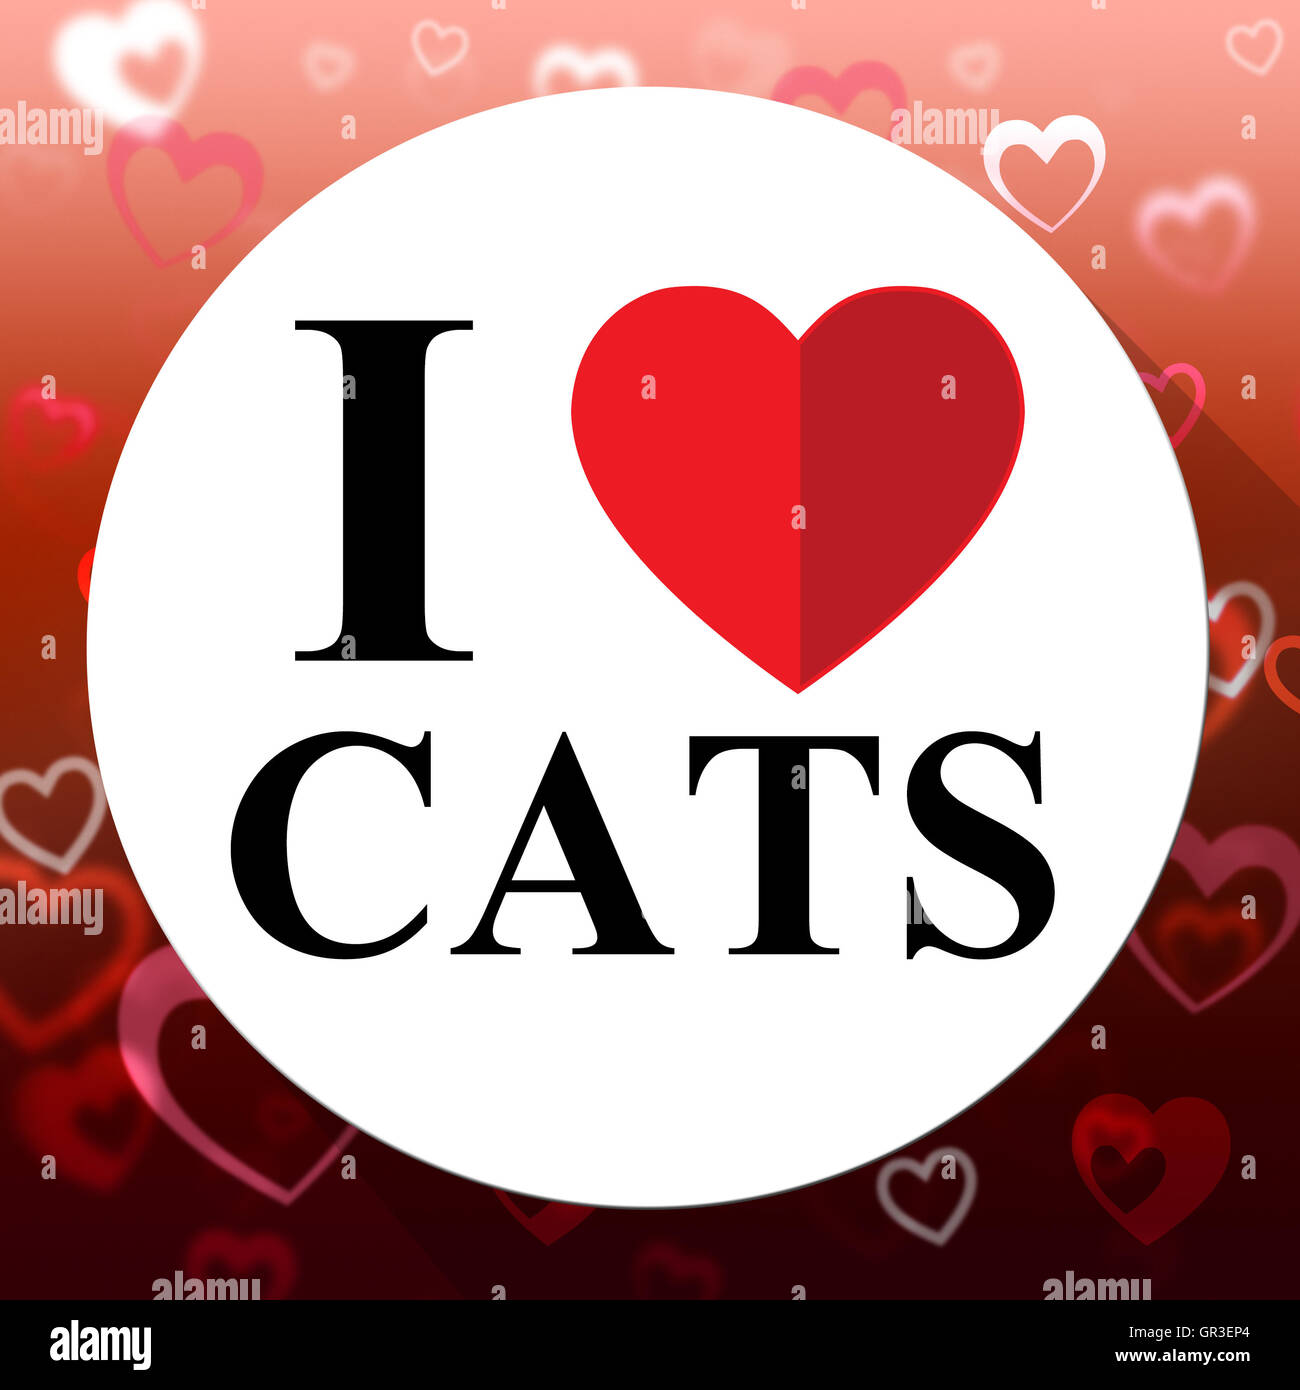 Love Cats Showing Kitty Superb And Agreeable Cat Stock Photo